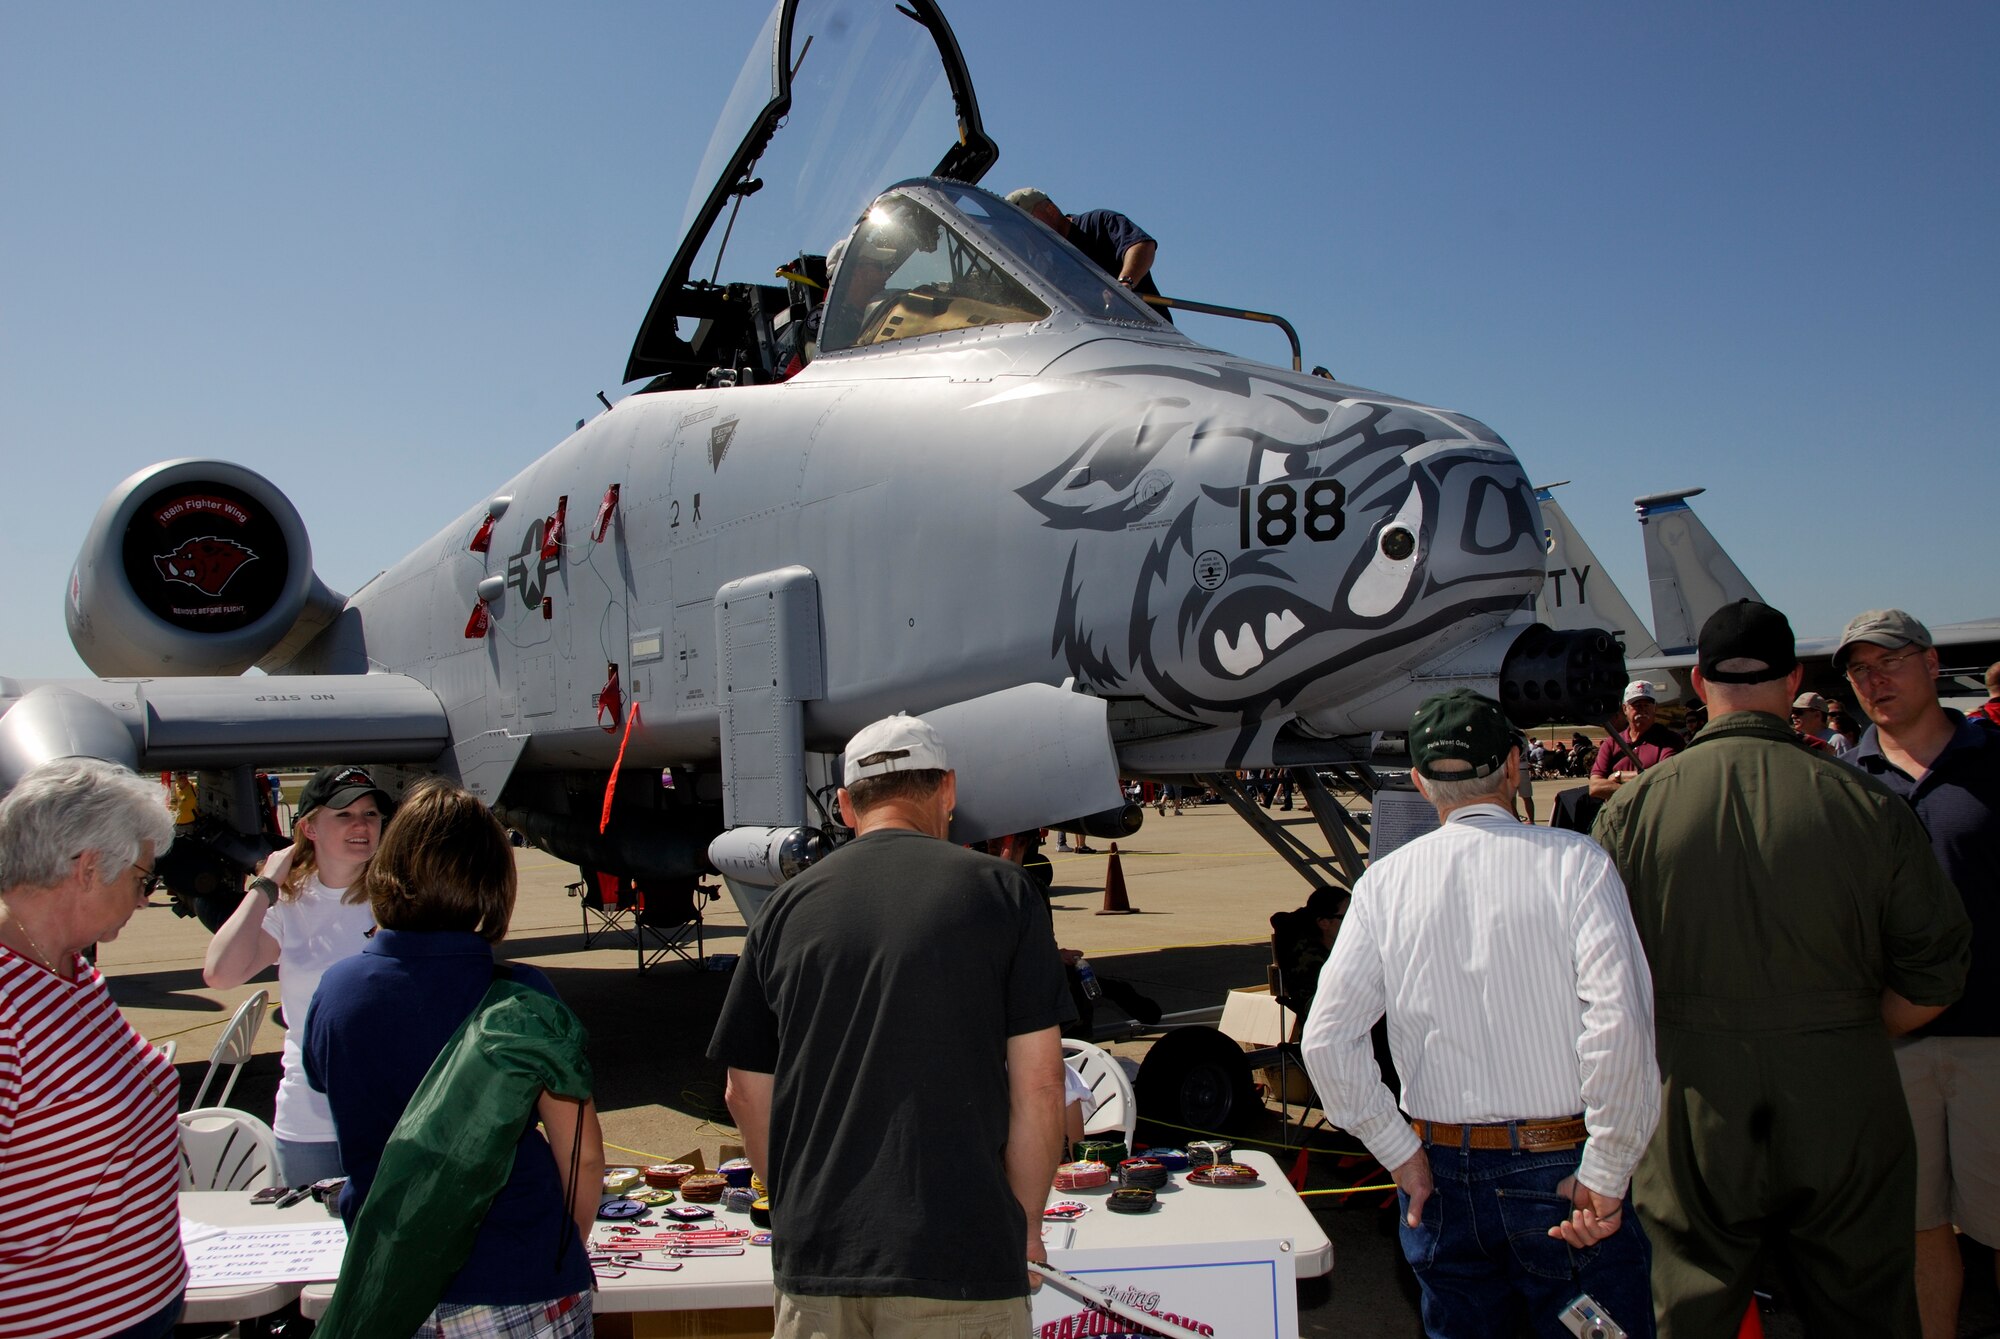 Spectators gather around one of the 188th Fighter Wing’s A-10 Thunderbolt II “Warthogs” at the Fort Smith Air Show May 17, 2008. The 2008 show was attended by a record 200,000 people. The next Fort Smith Air Show is slated for Oct. 1-2, 2011. (U.S. Air Force photo by Senior Master Sgt. Dennis Brambl/188th Fighter Wing Public Affairs)